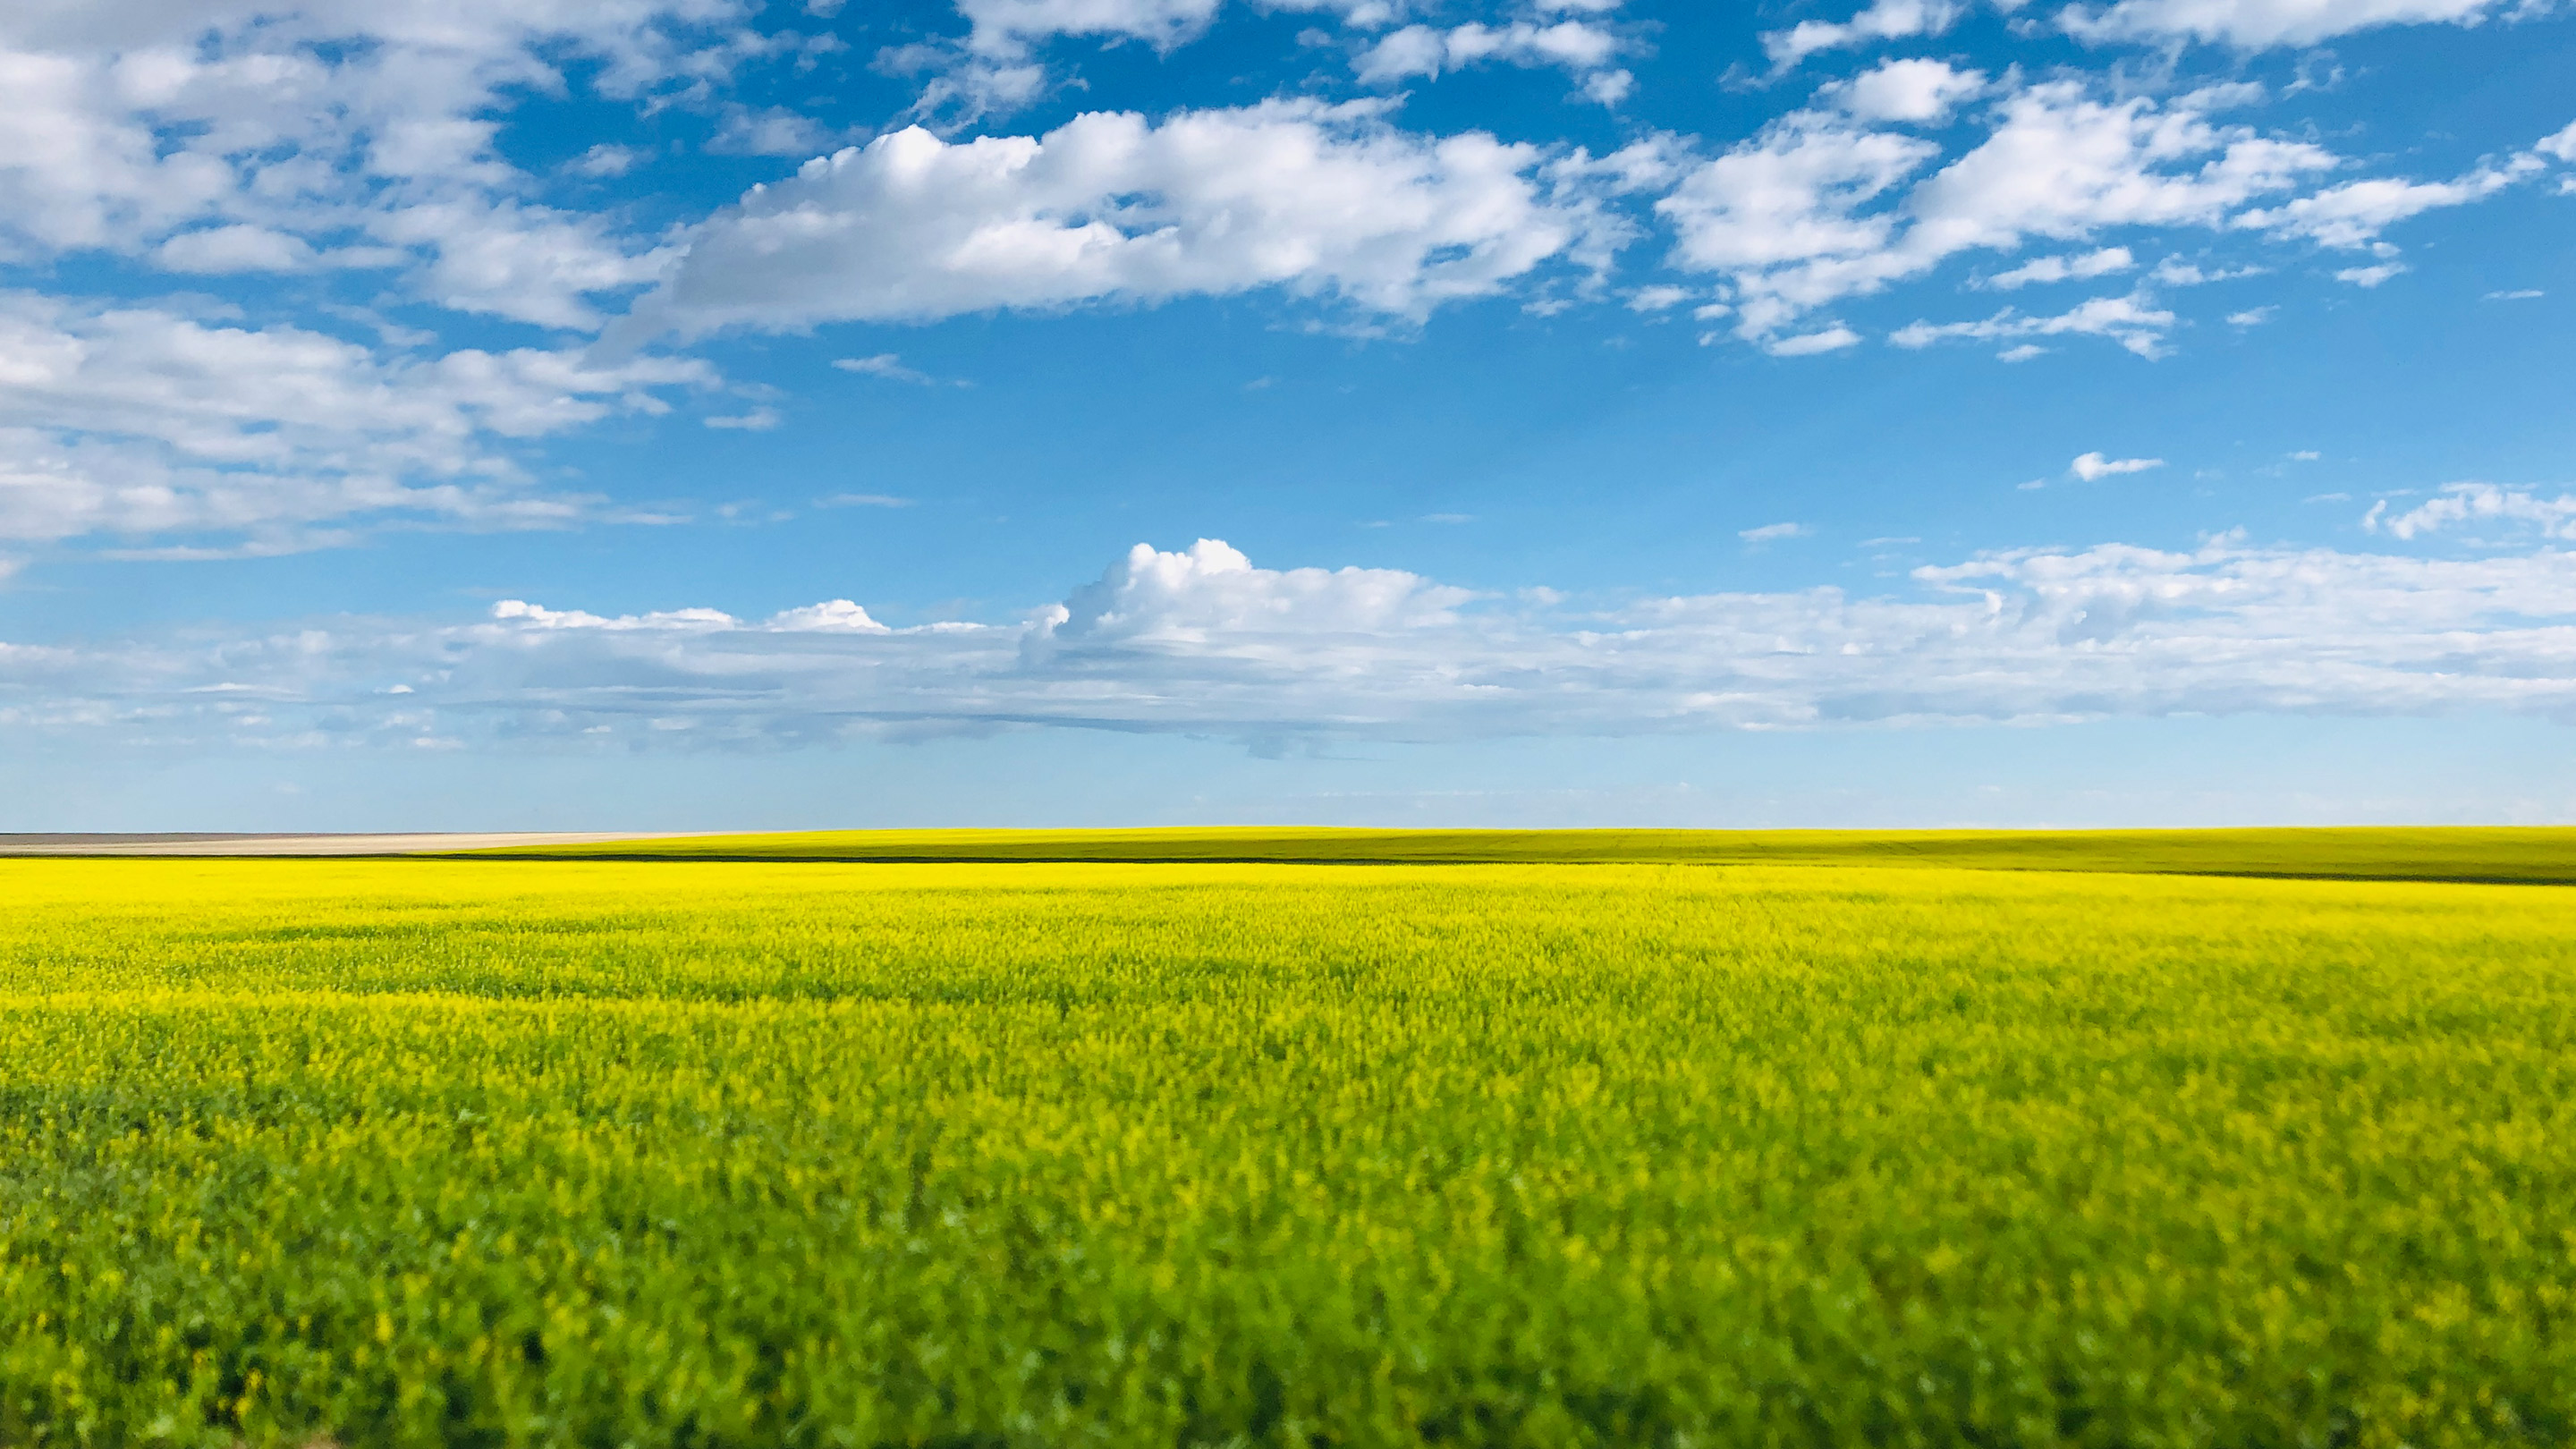 camelina, a patented fallow land crop used in production of renewable diesel with GCEHoldings